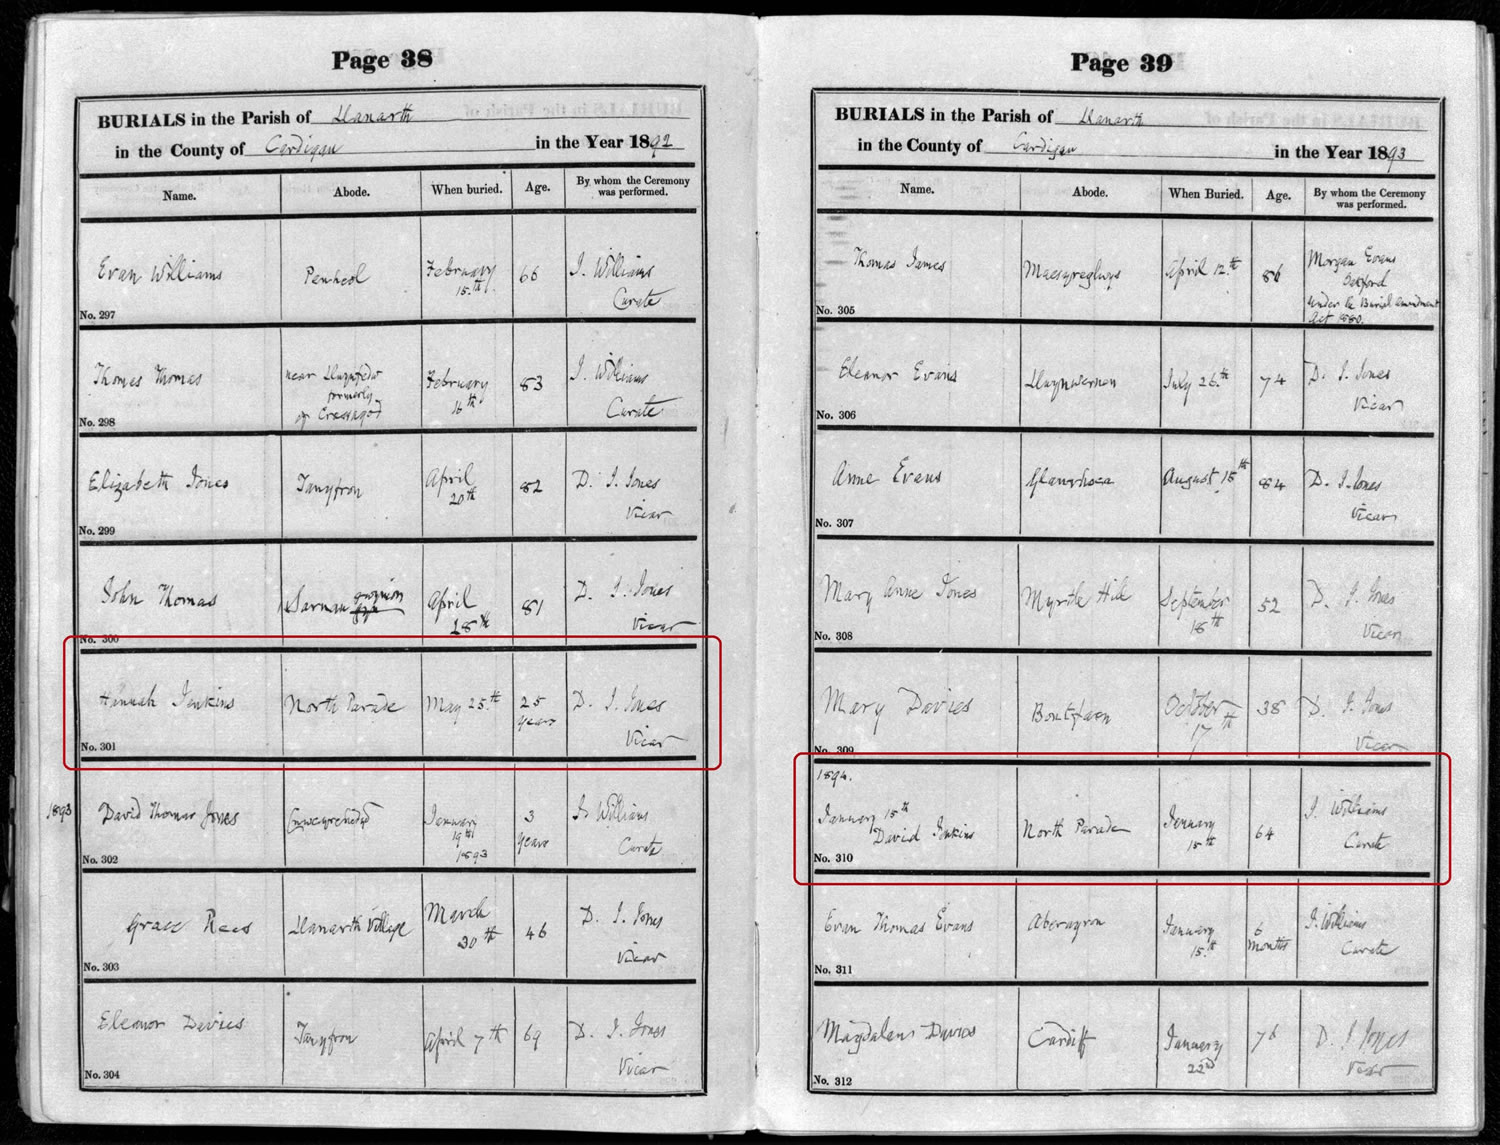 Llanarth burial register for 1892 shows daughter Hannah at age 25, and the next year their father, David 64